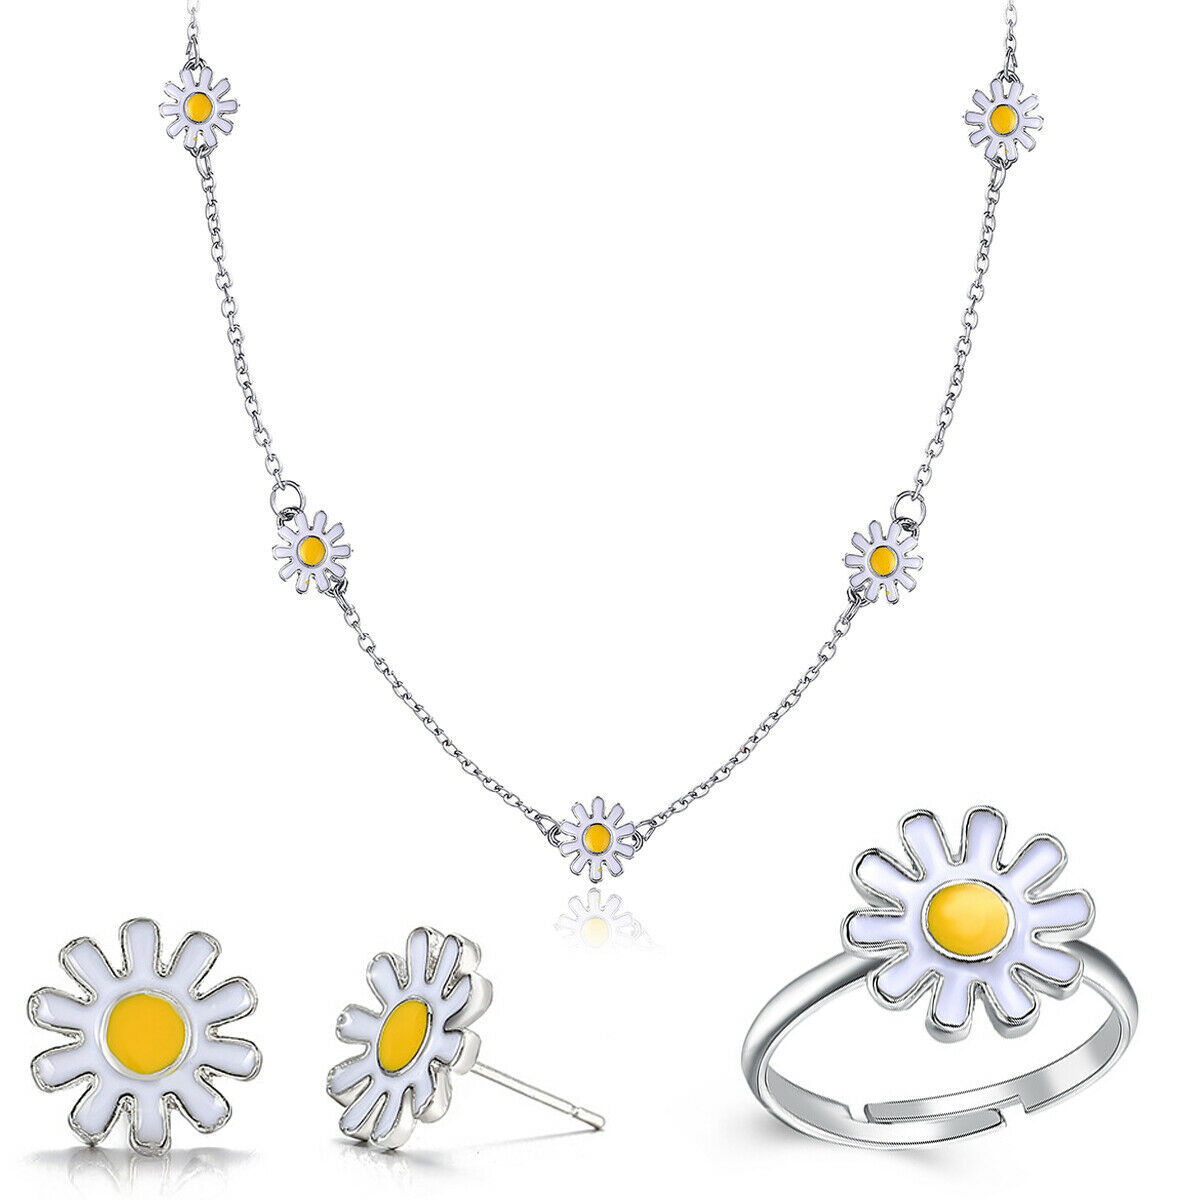 Unbranded - Cherry blossoms flower jewelry sets(ring+earrings+necklace+bracelet)